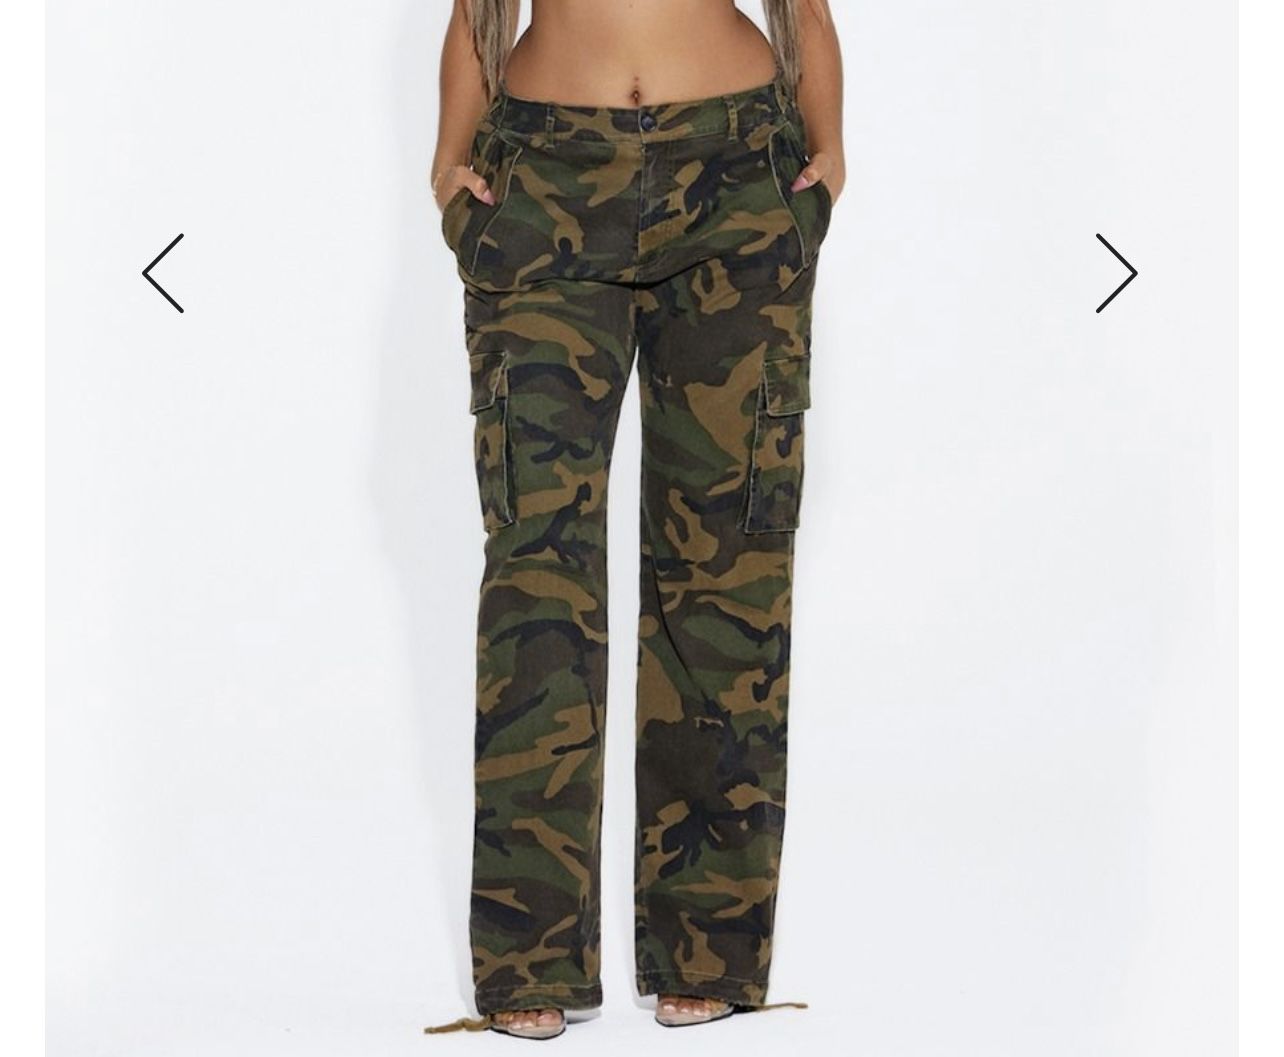 Polo Ralph Lauren Cargo Pants Camo Size 34x32 for Sale in San Francisco, CA  - OfferUp